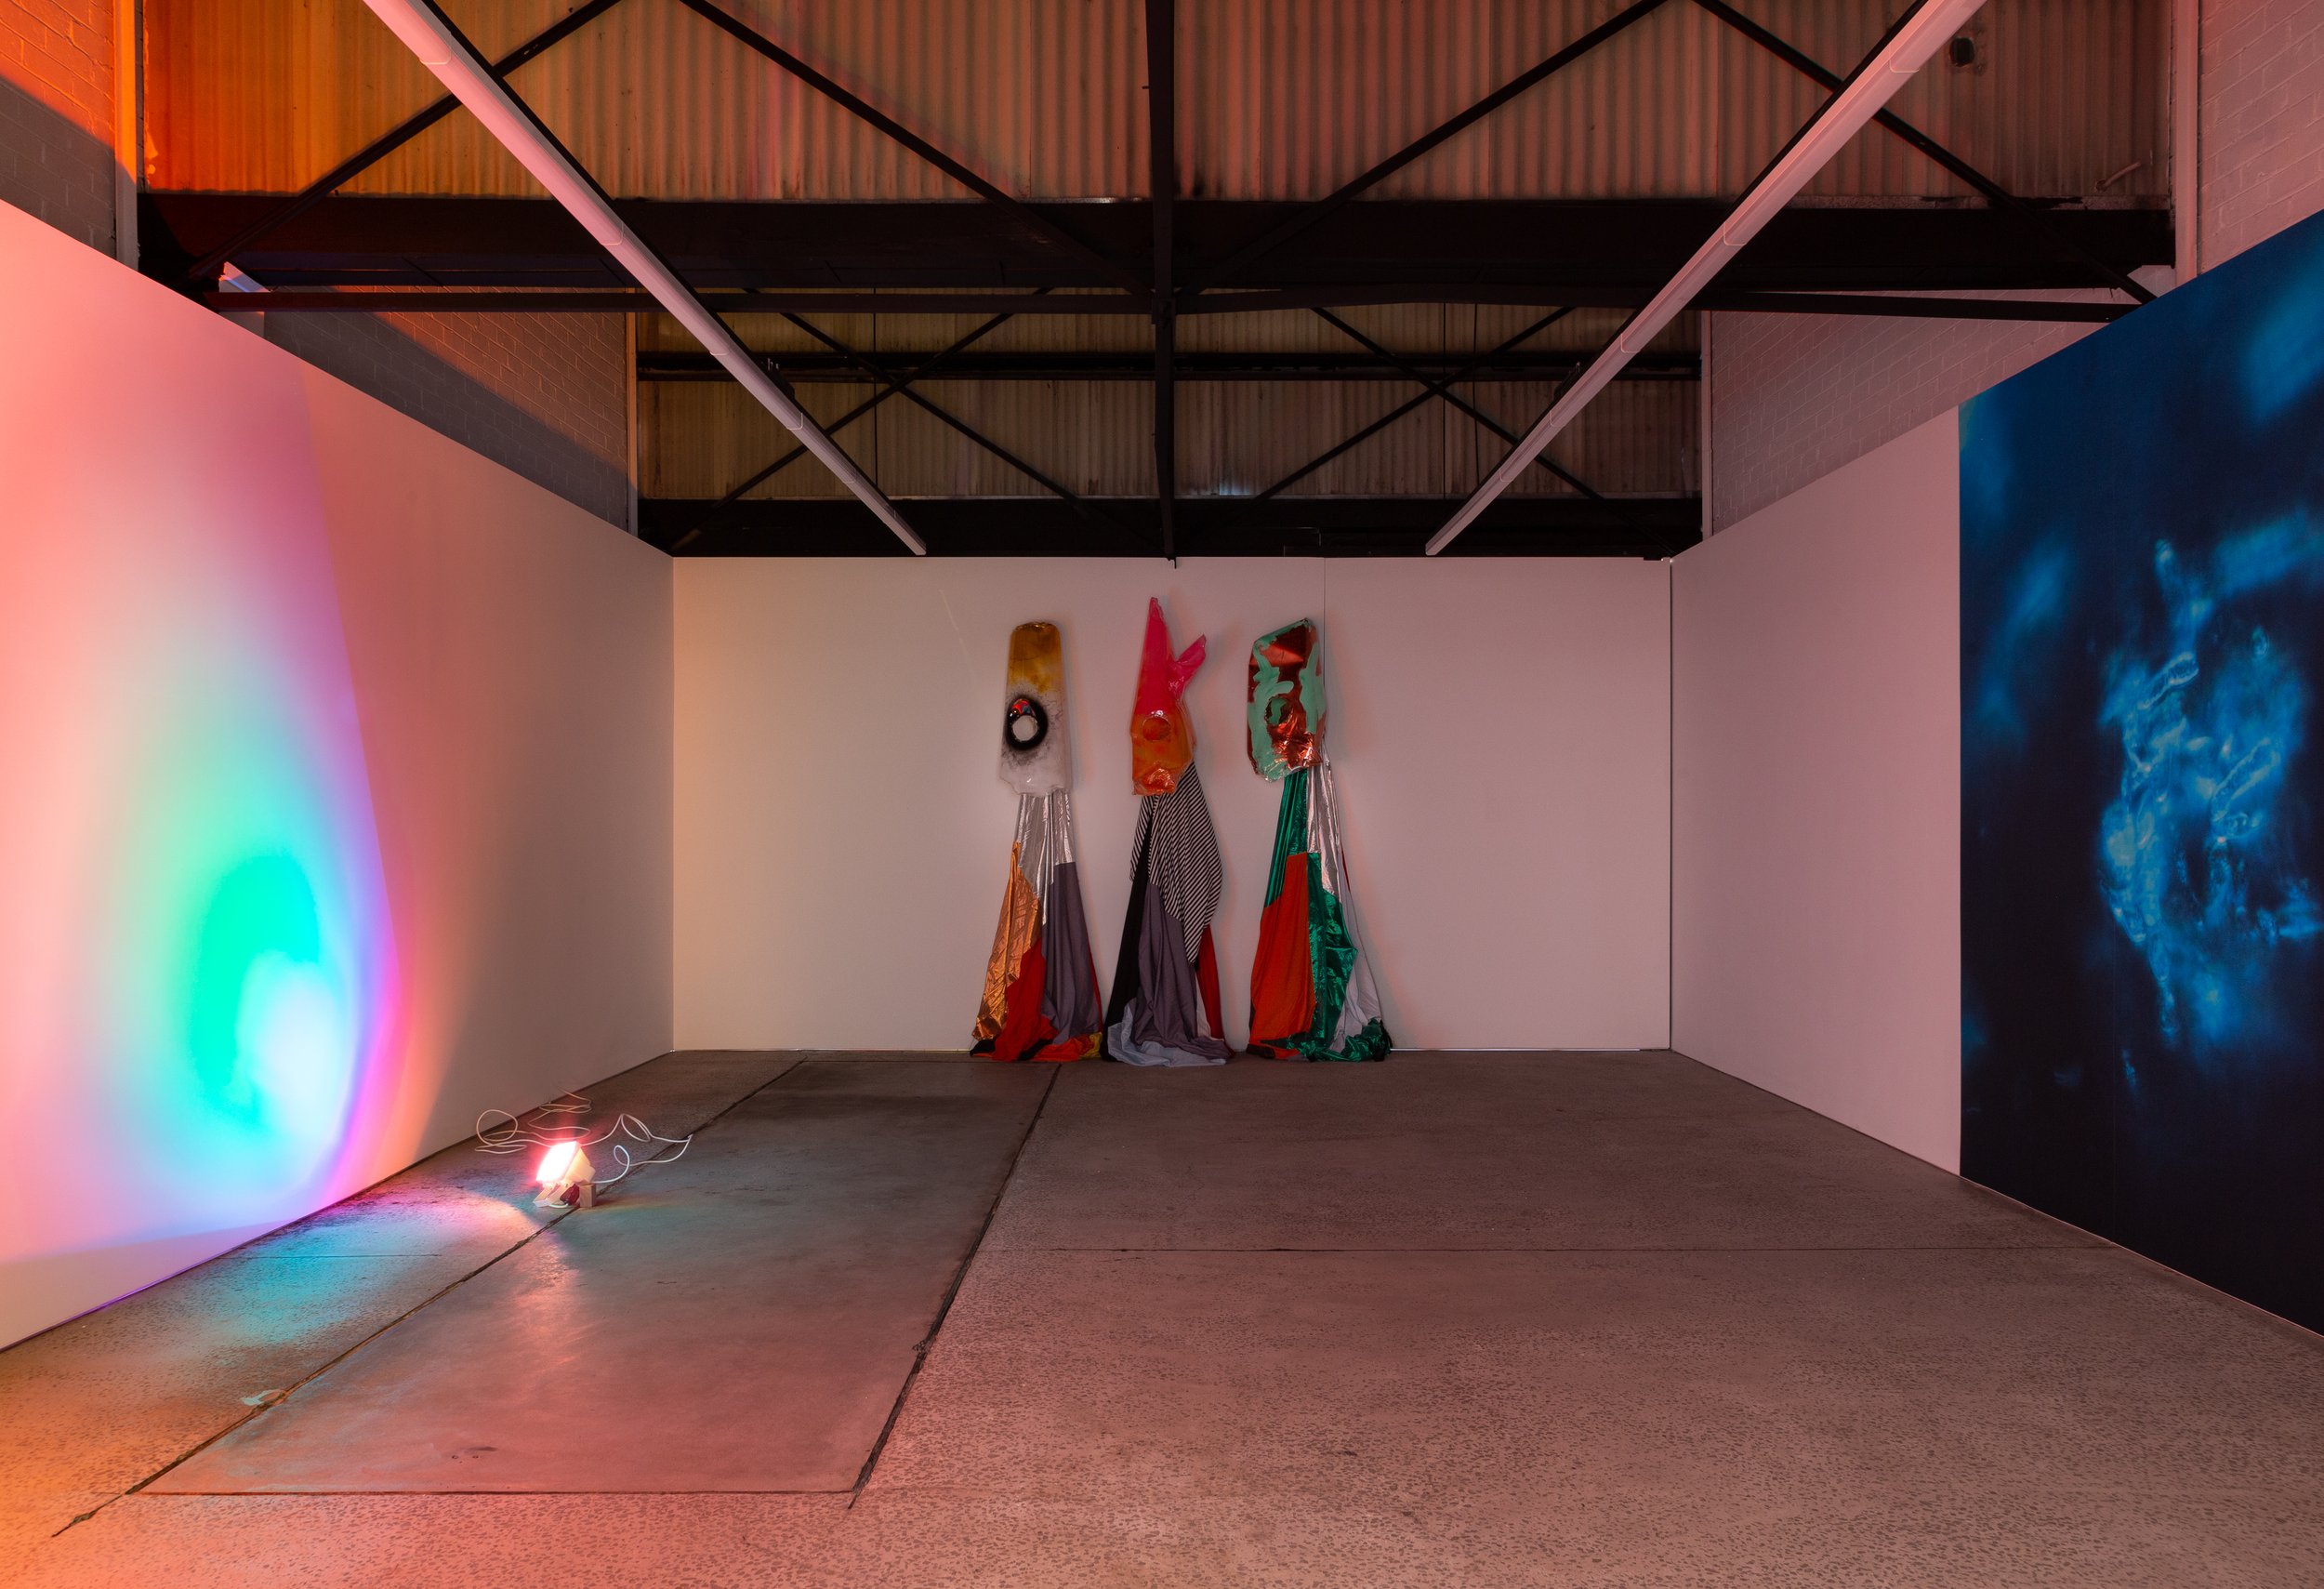 Mikala Dwyer, The Guards (installation view), 2017, plastic, paint, fabric, stockings, dimensions variable | | An eeriness on the Plain, 1310SW, Melbourne